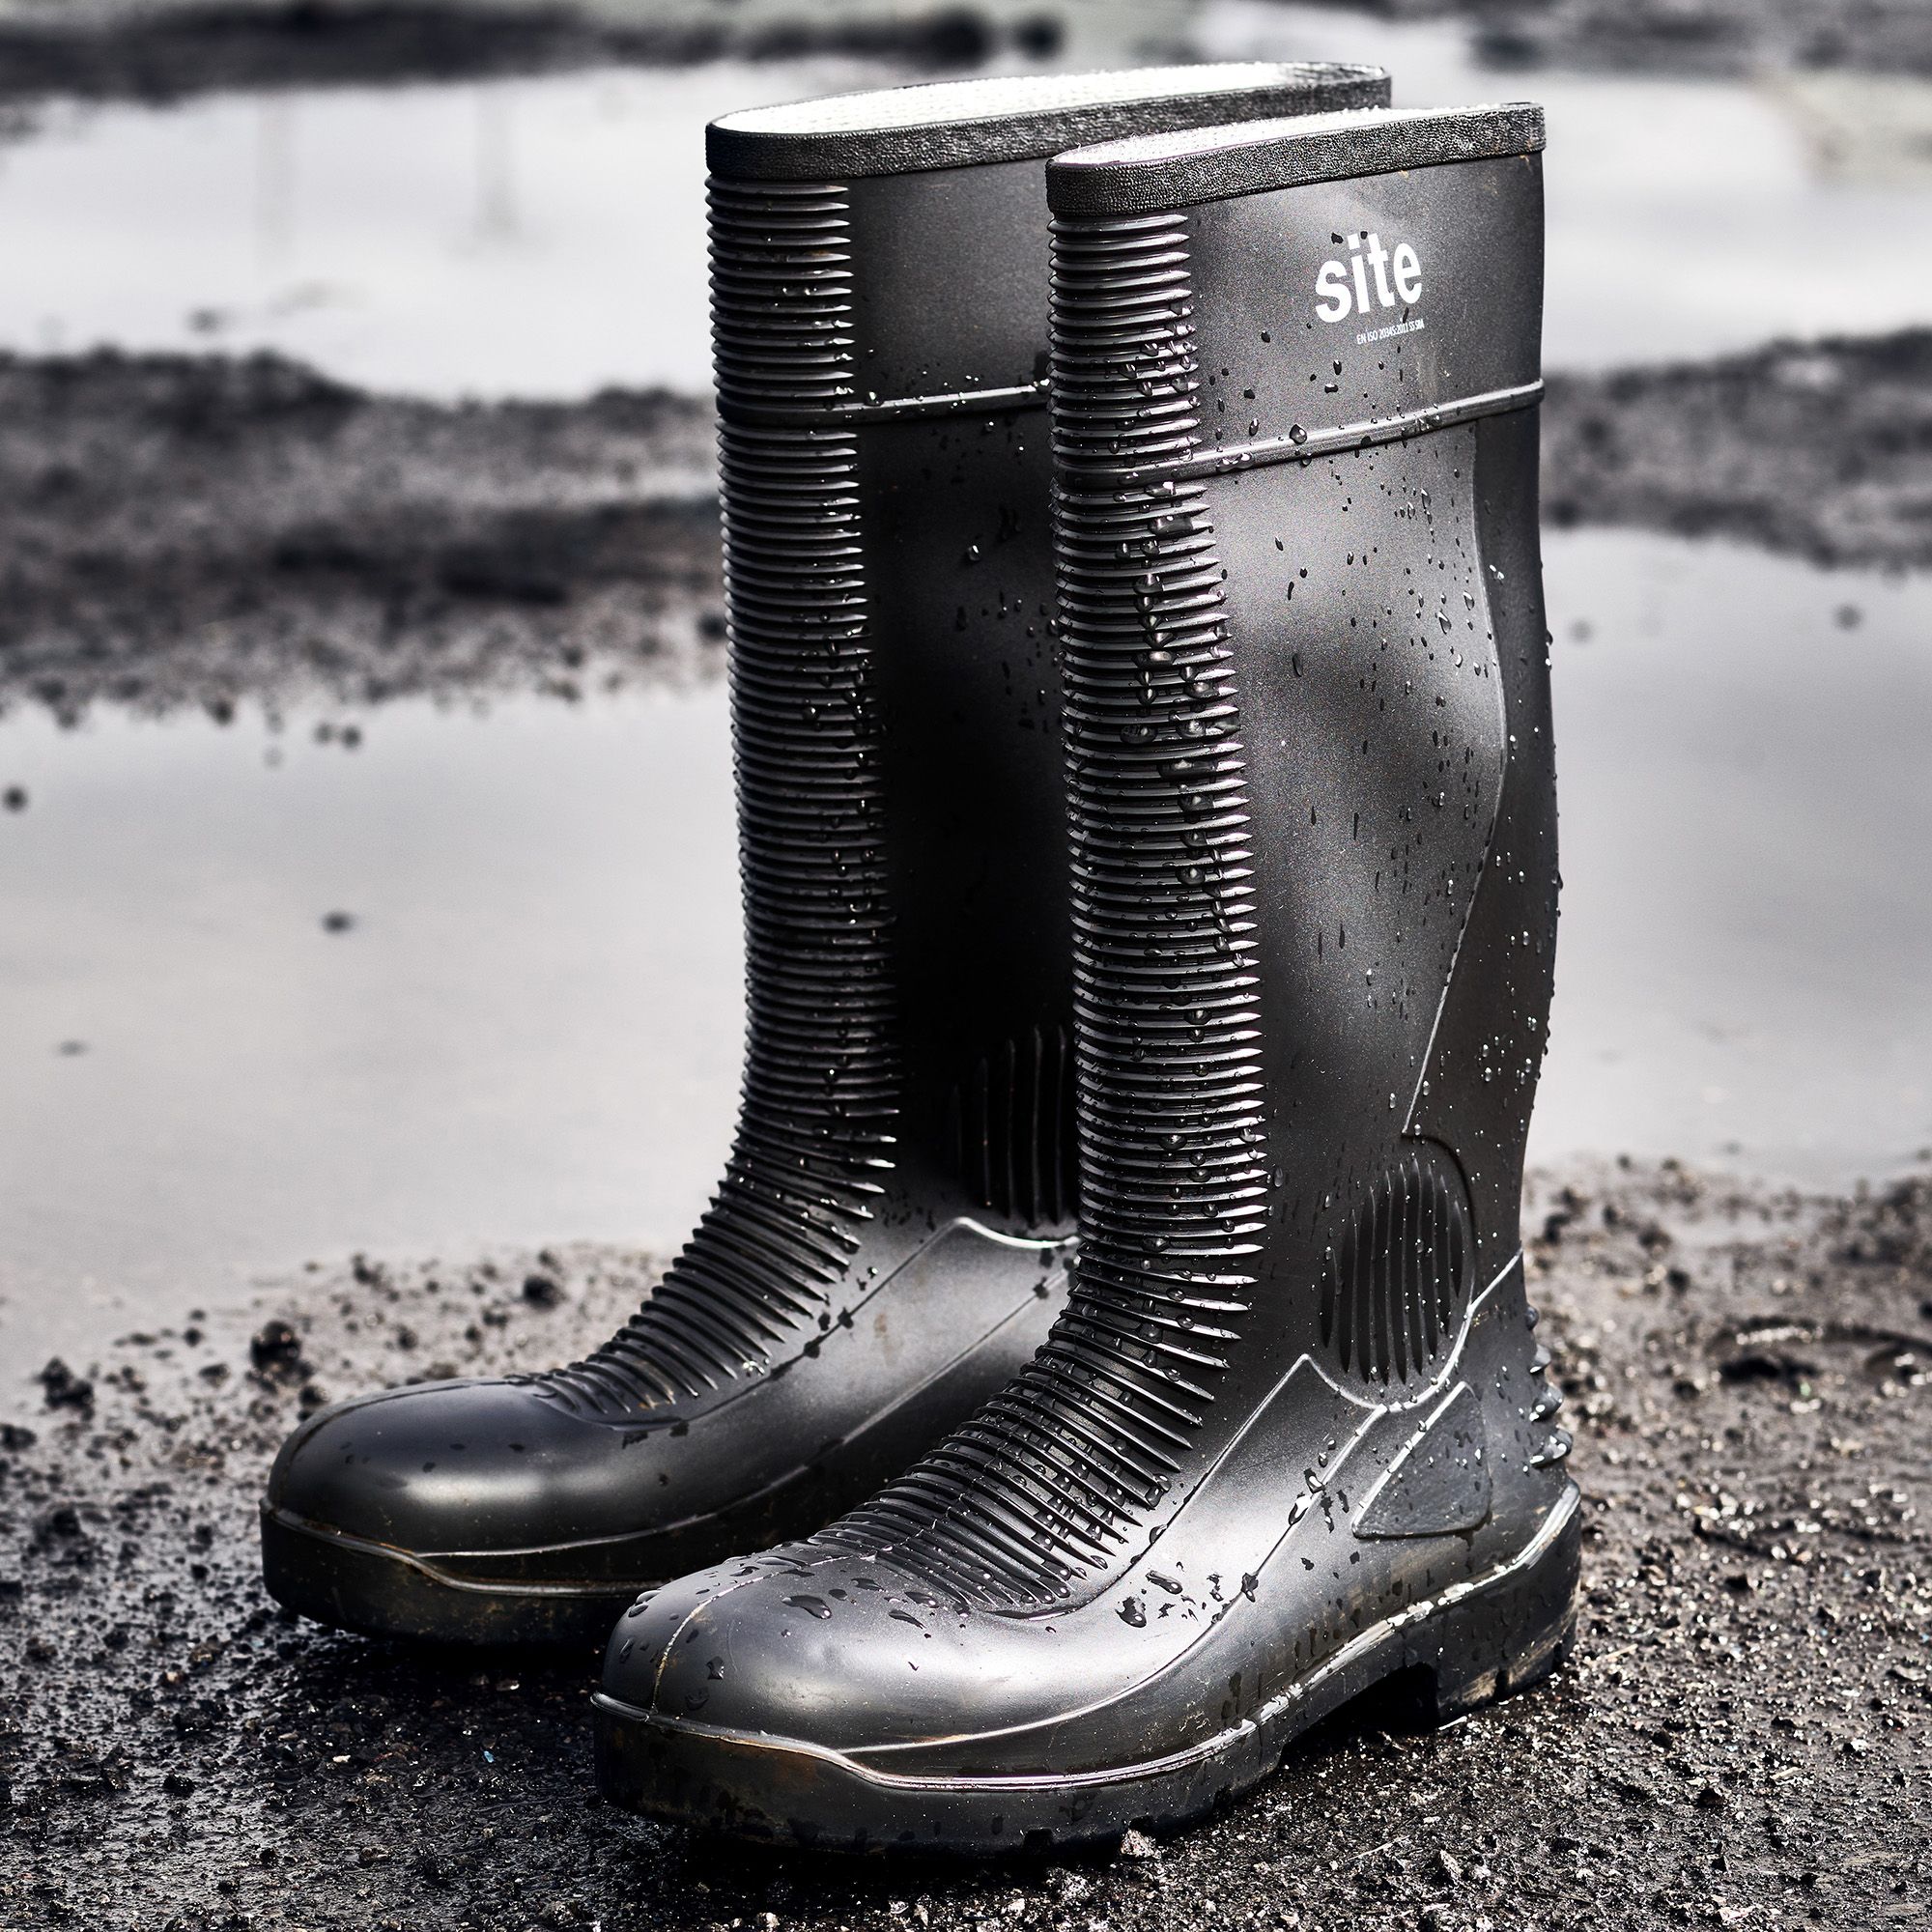 Site Trench Black Safety wellington boots, Size 12 | DIY at B&Q